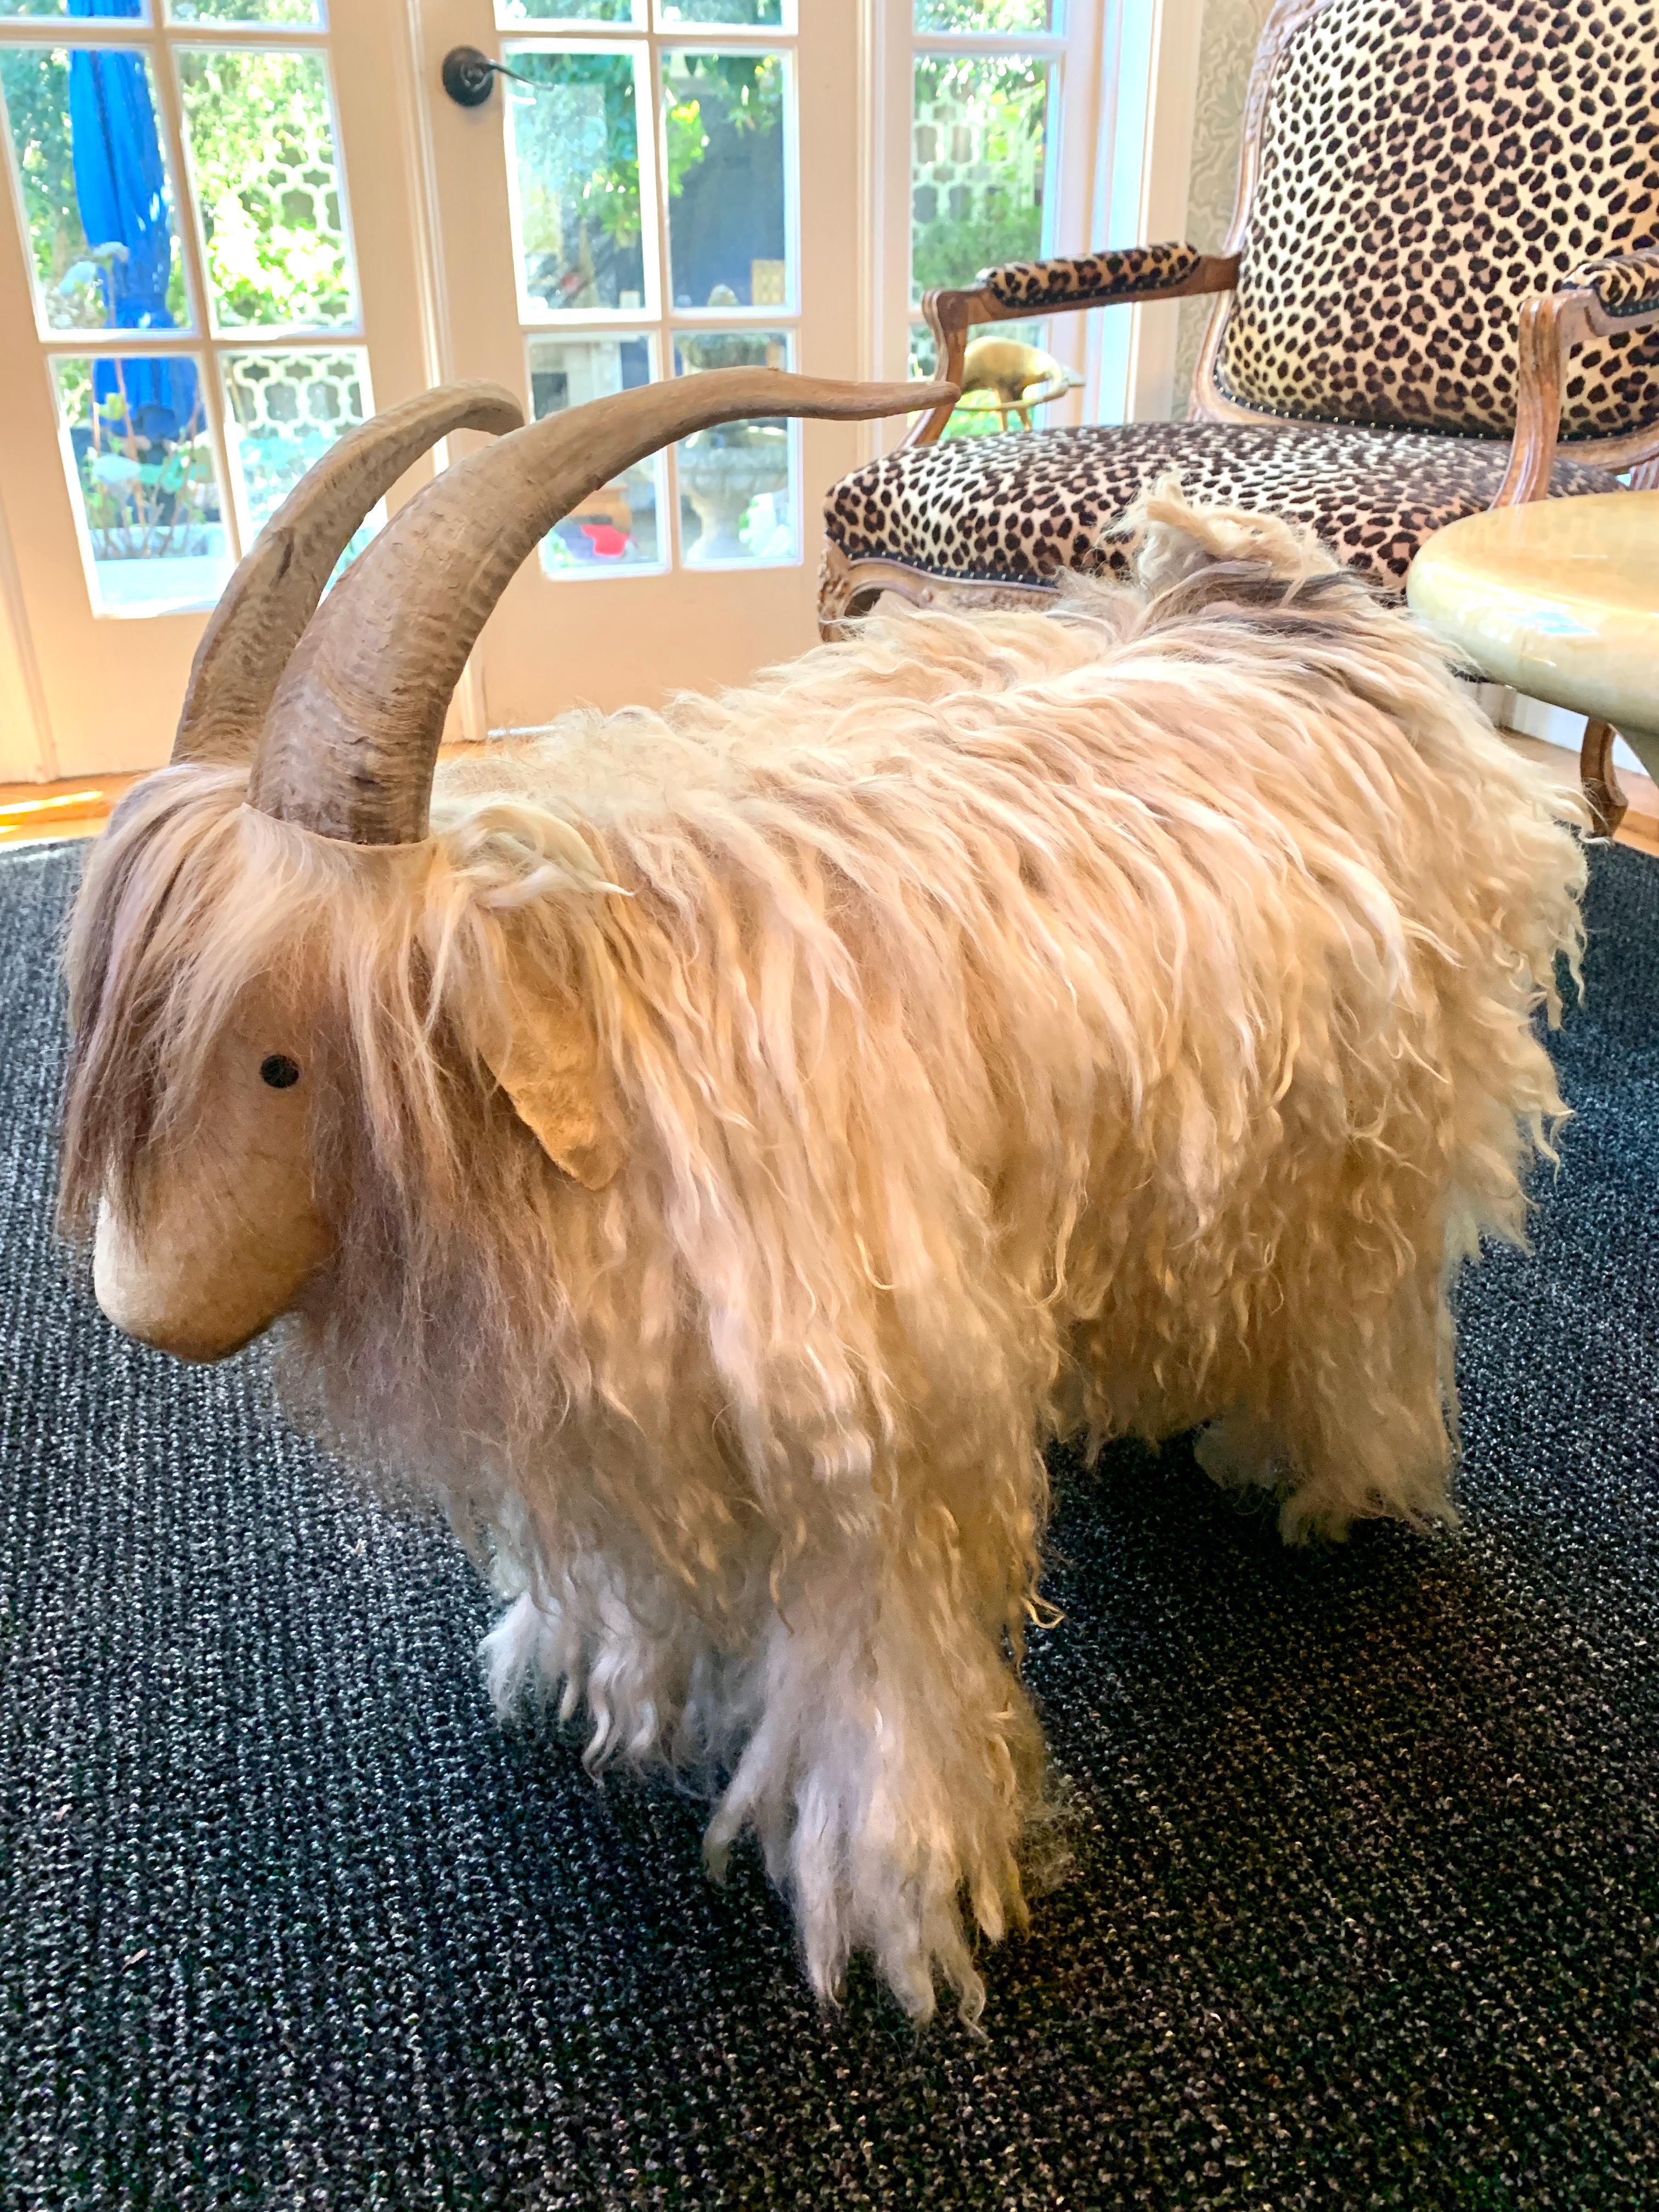 A wonderful ottoman, stool or sculpture in the style of famous French sheep.   The sculpture is covered in real long hair fur, real horn or antlers and a hide covered face. The hoof feet are black painted wood. A stunning conversation piece that